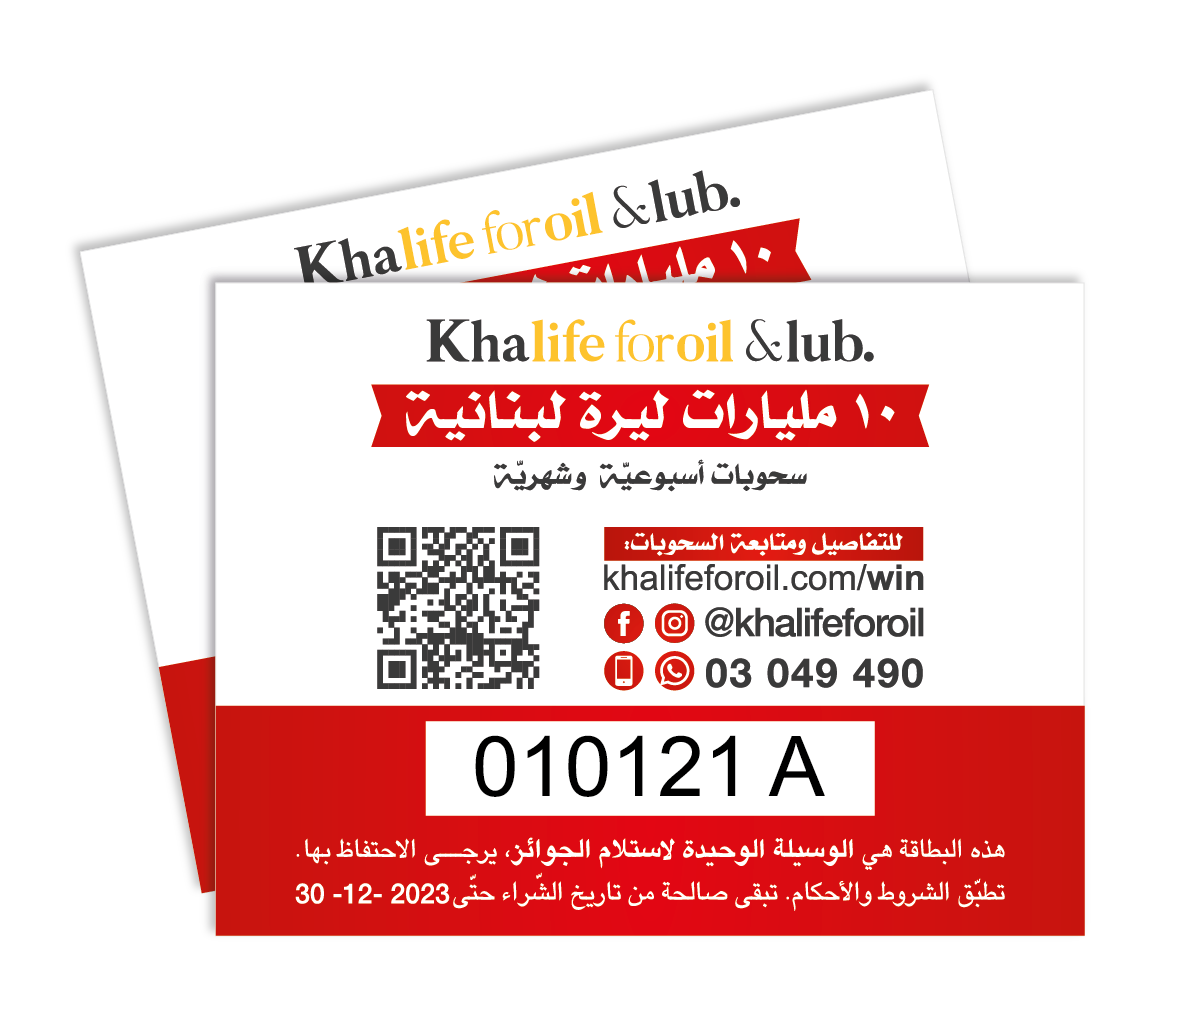 Khalife for Oil & Lubricants